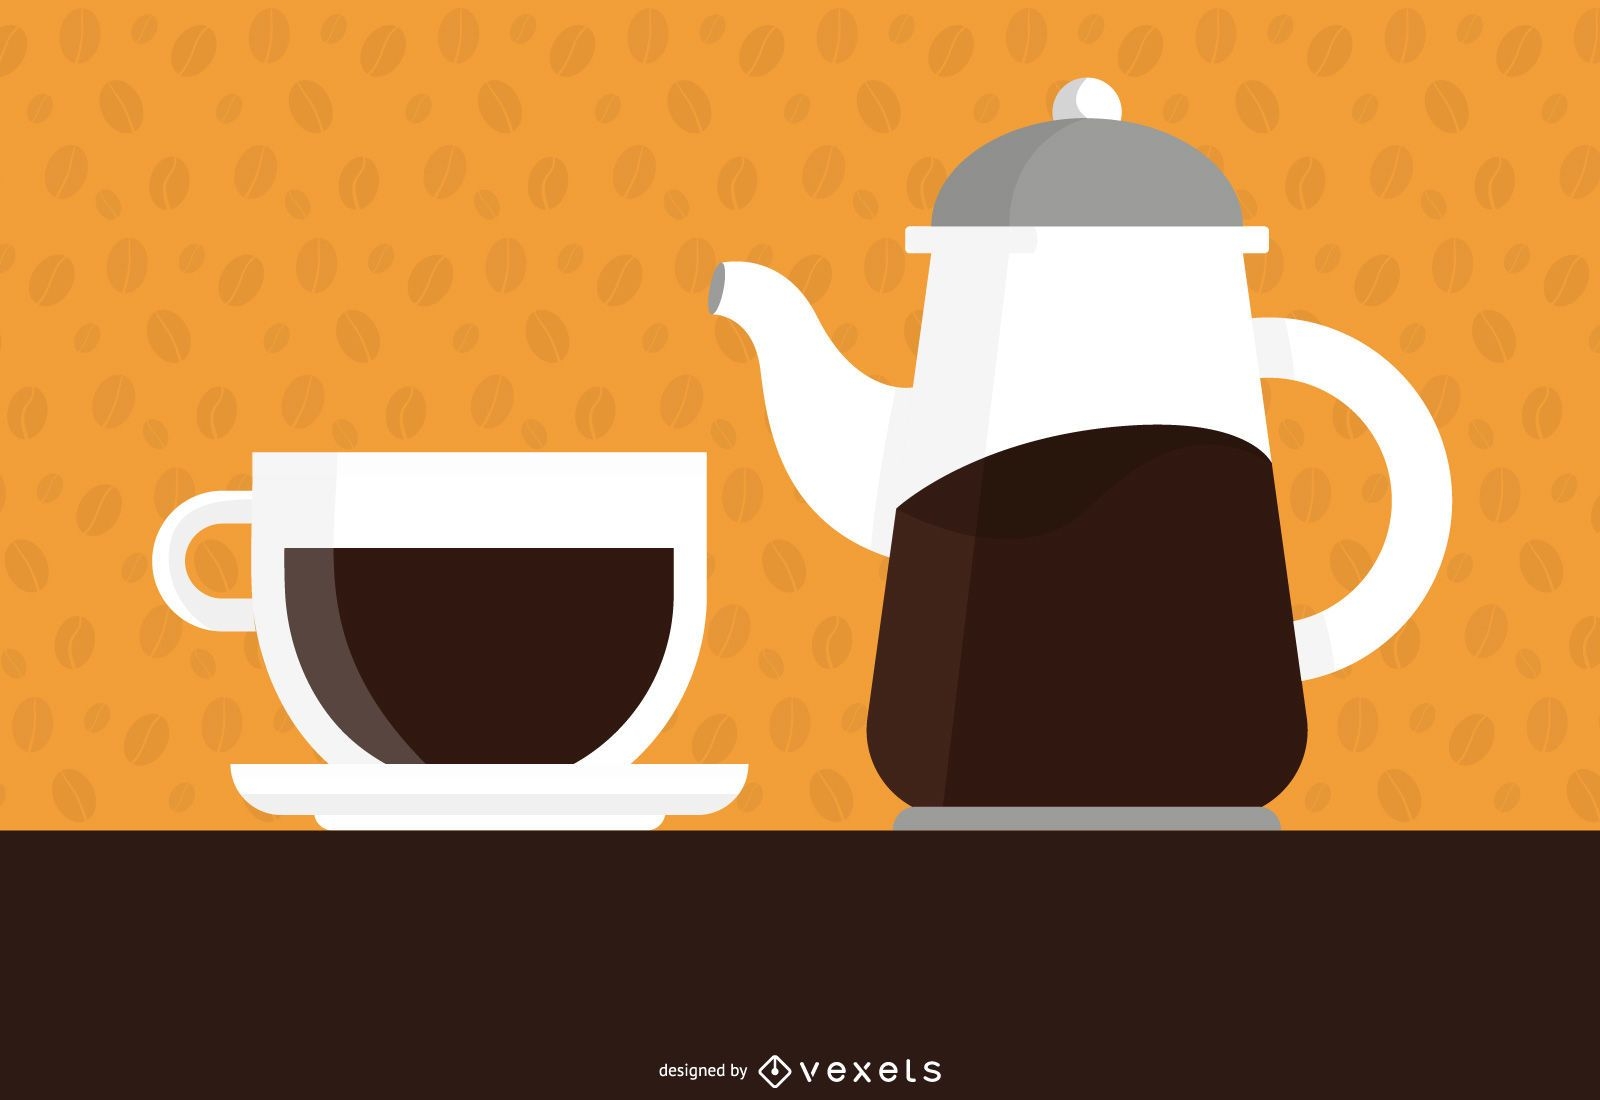 Cup of coffee illustration design